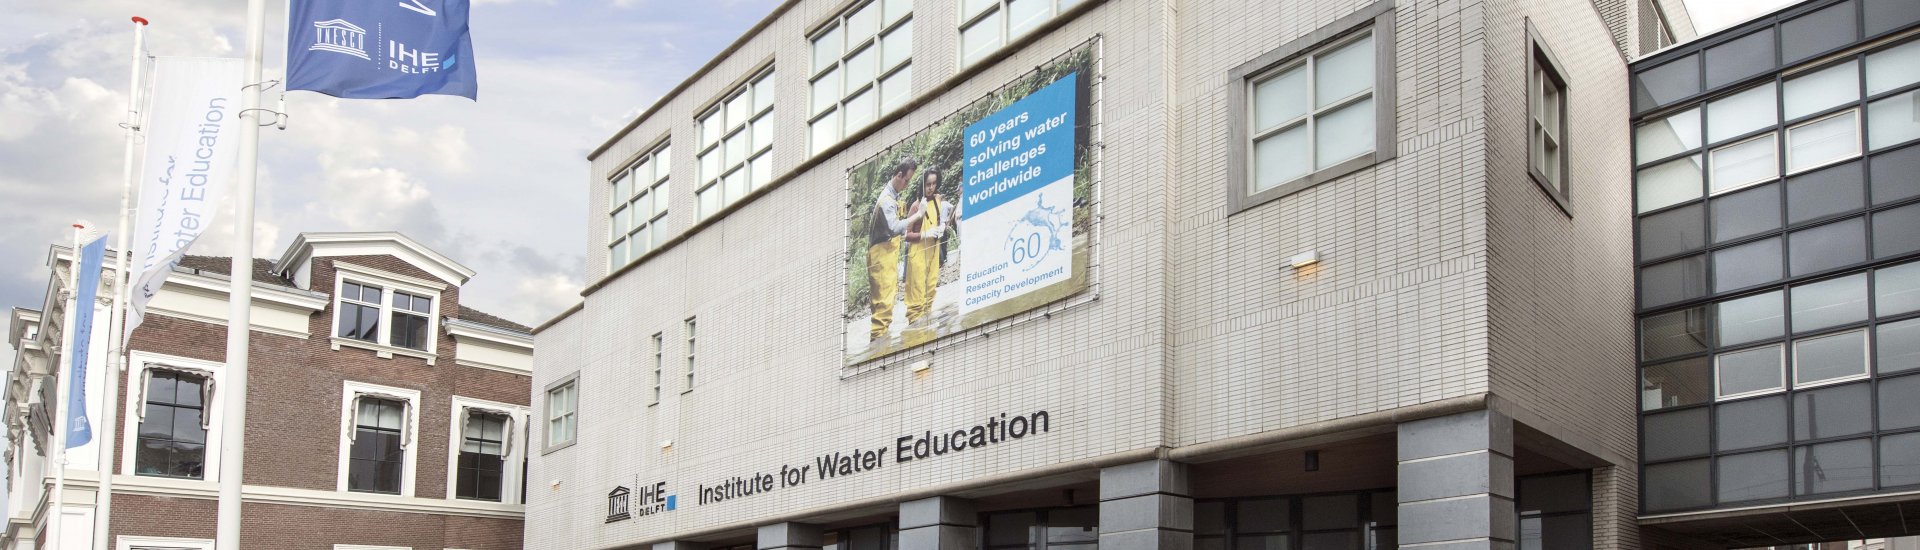 IHE Delft Institute for Water Education. 